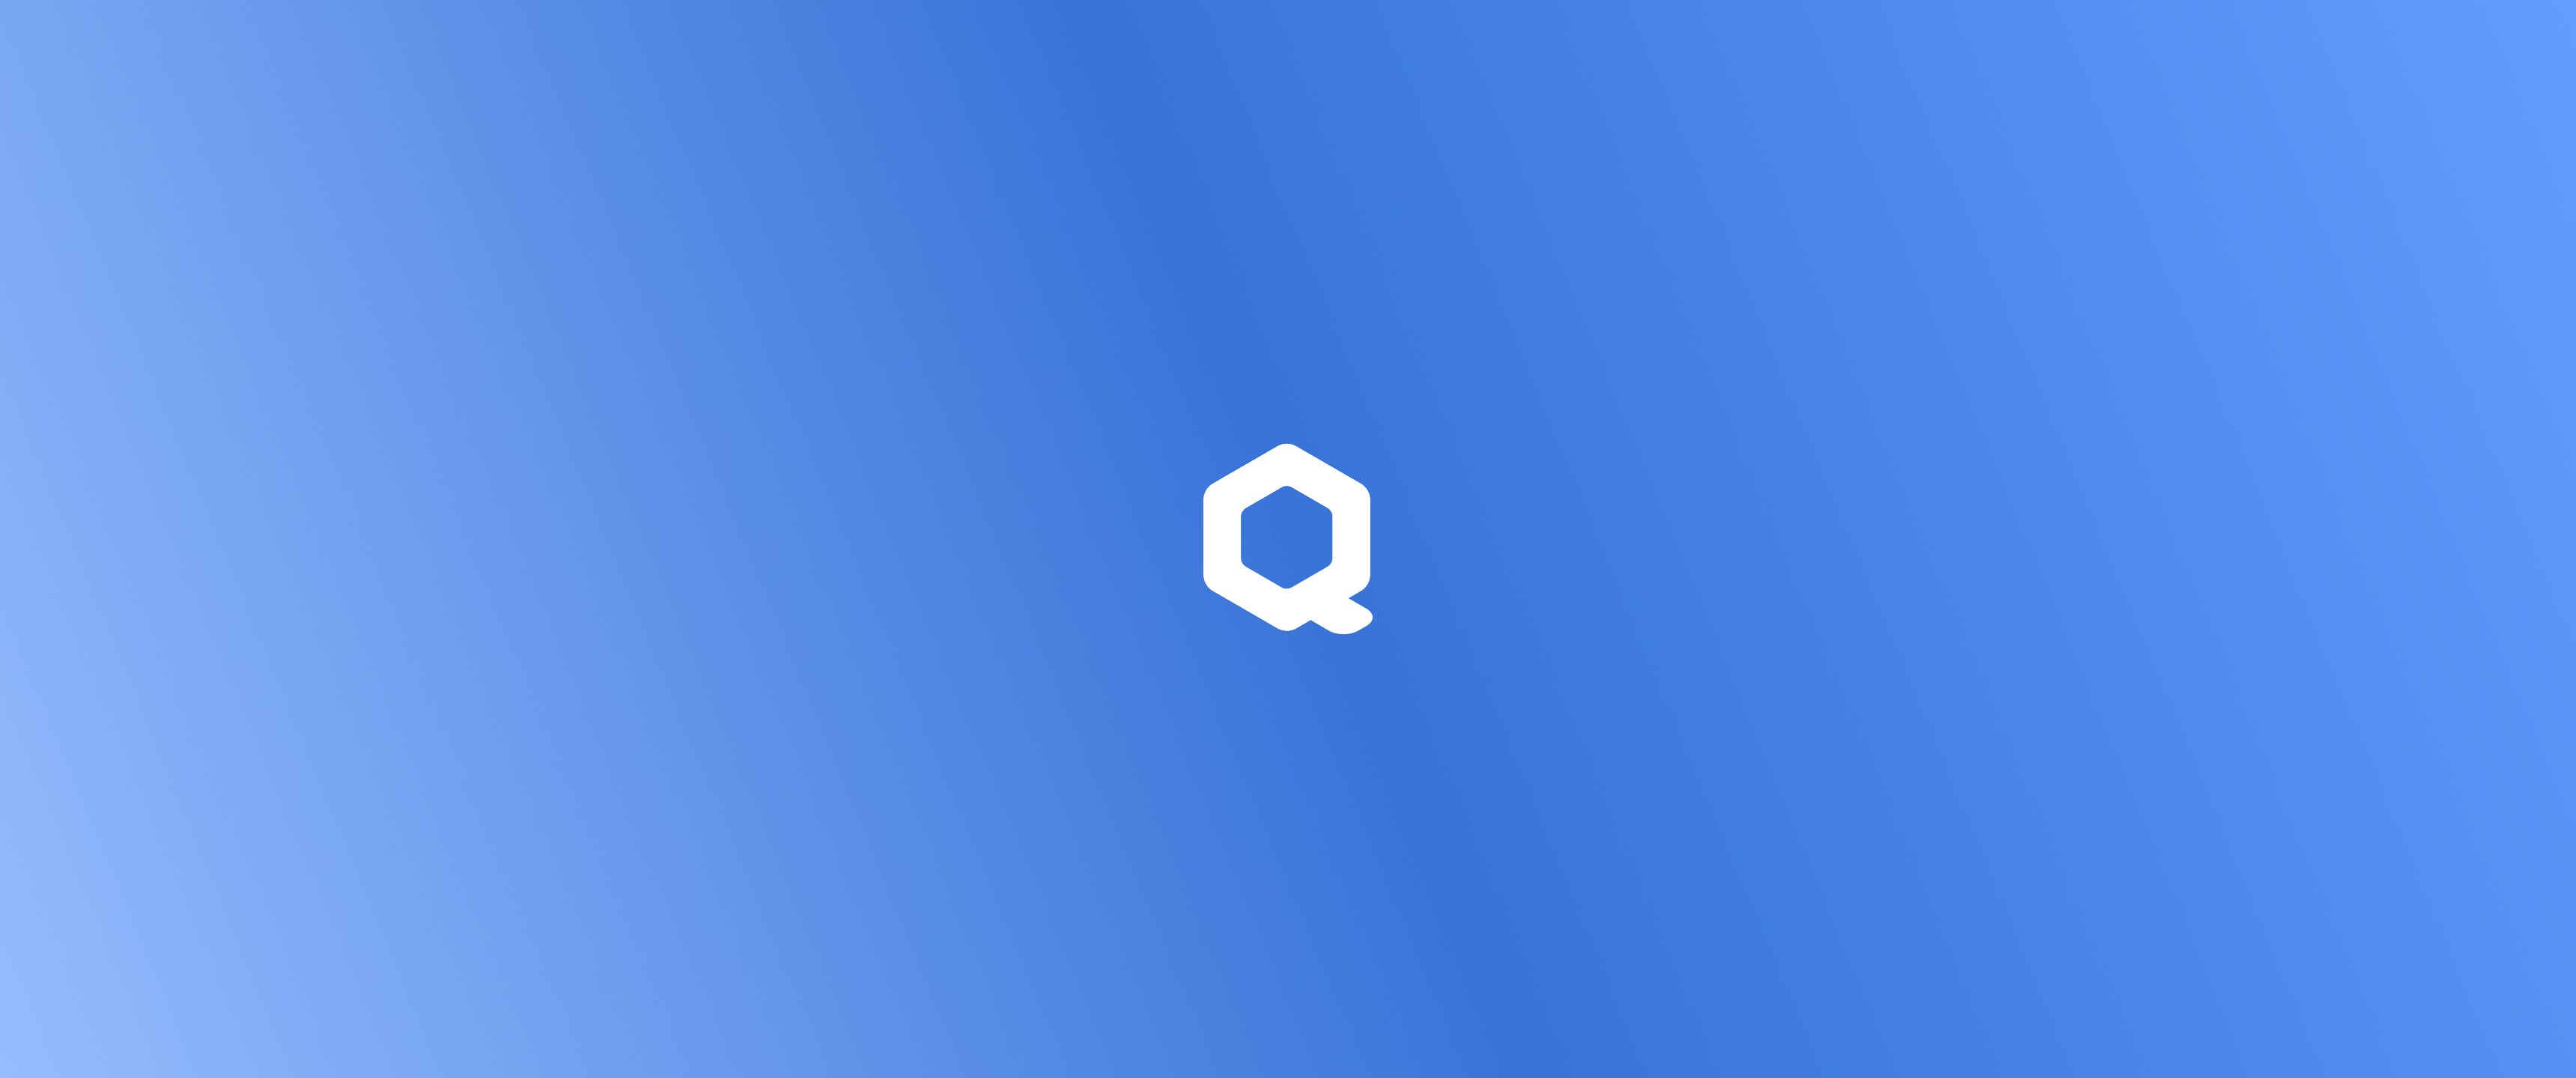 General 3440x1440 gradient minimalism operating system Linux qubes os logo simple background